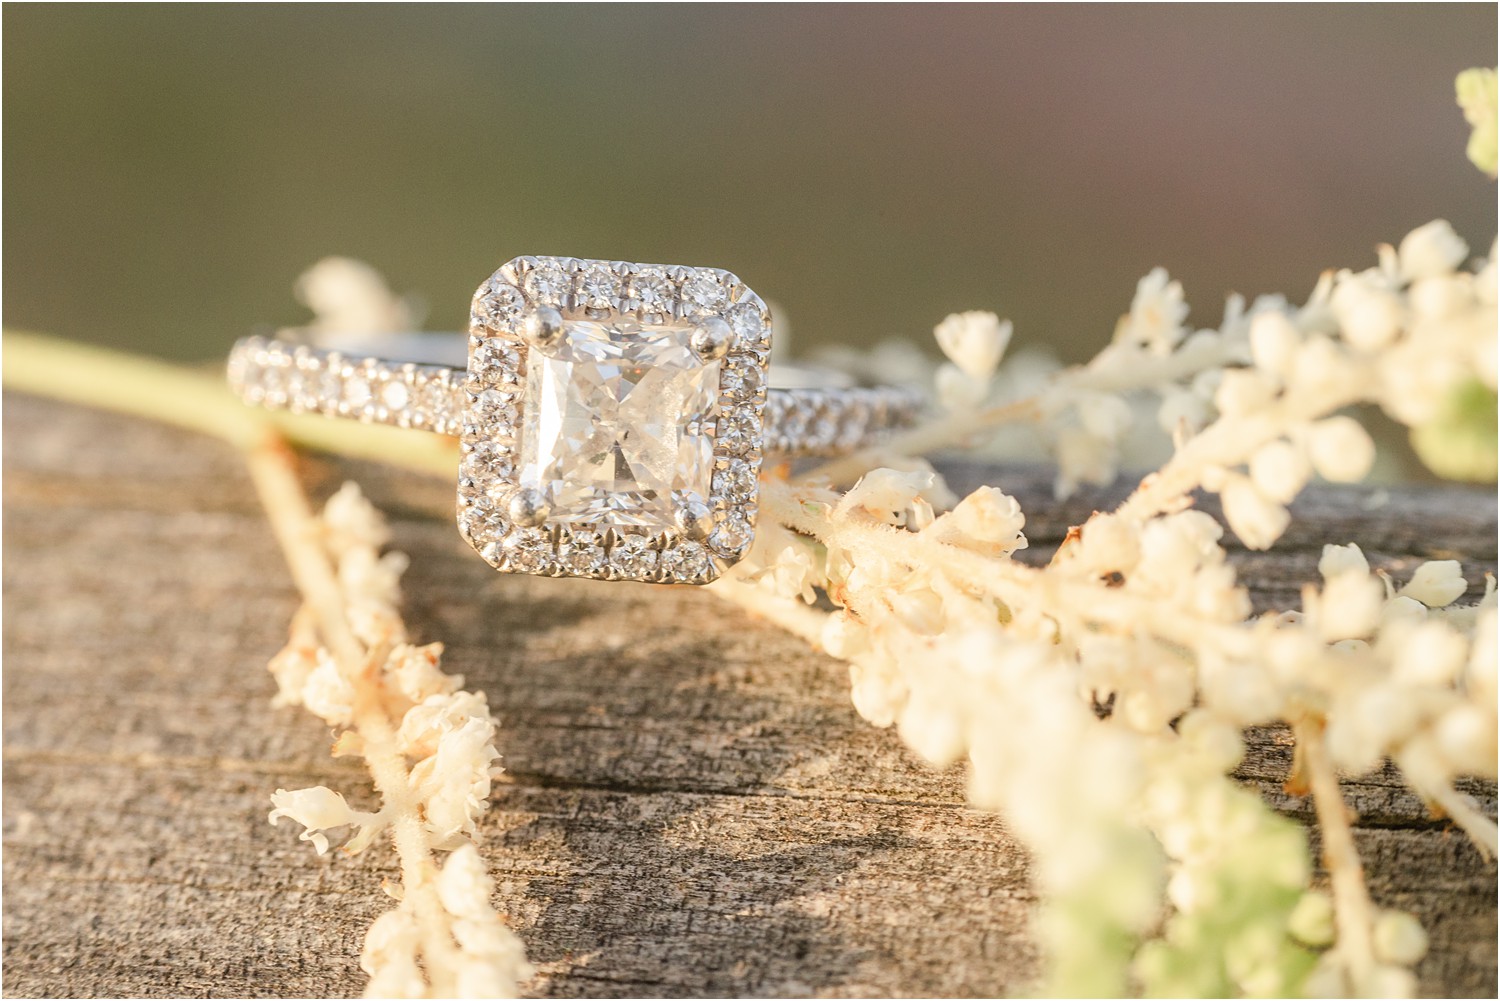 engagement ring on log surrounded by white flowers